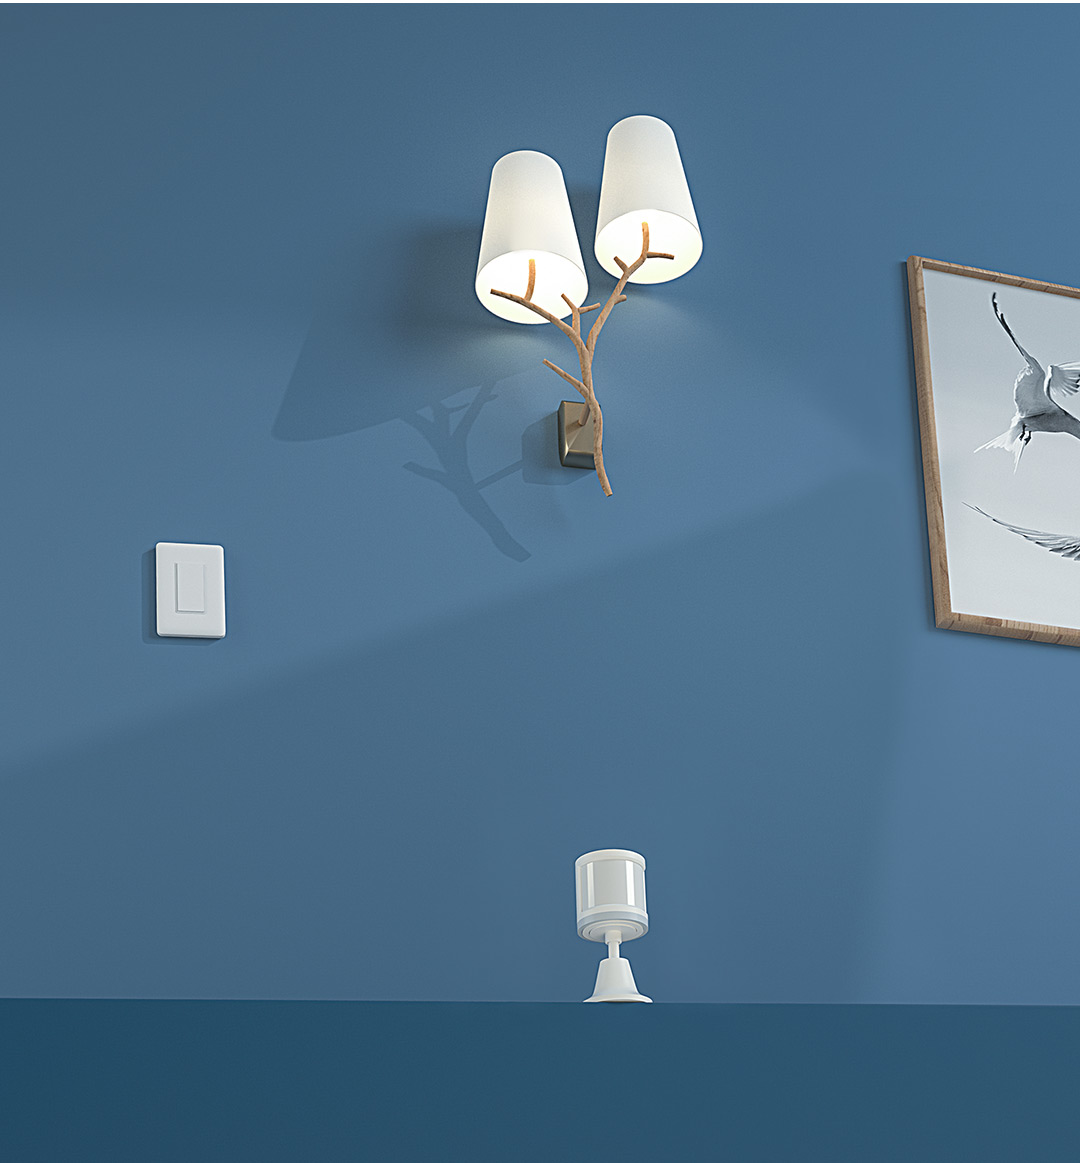 Smart lighting at night with our smart light switch and human motion sensor